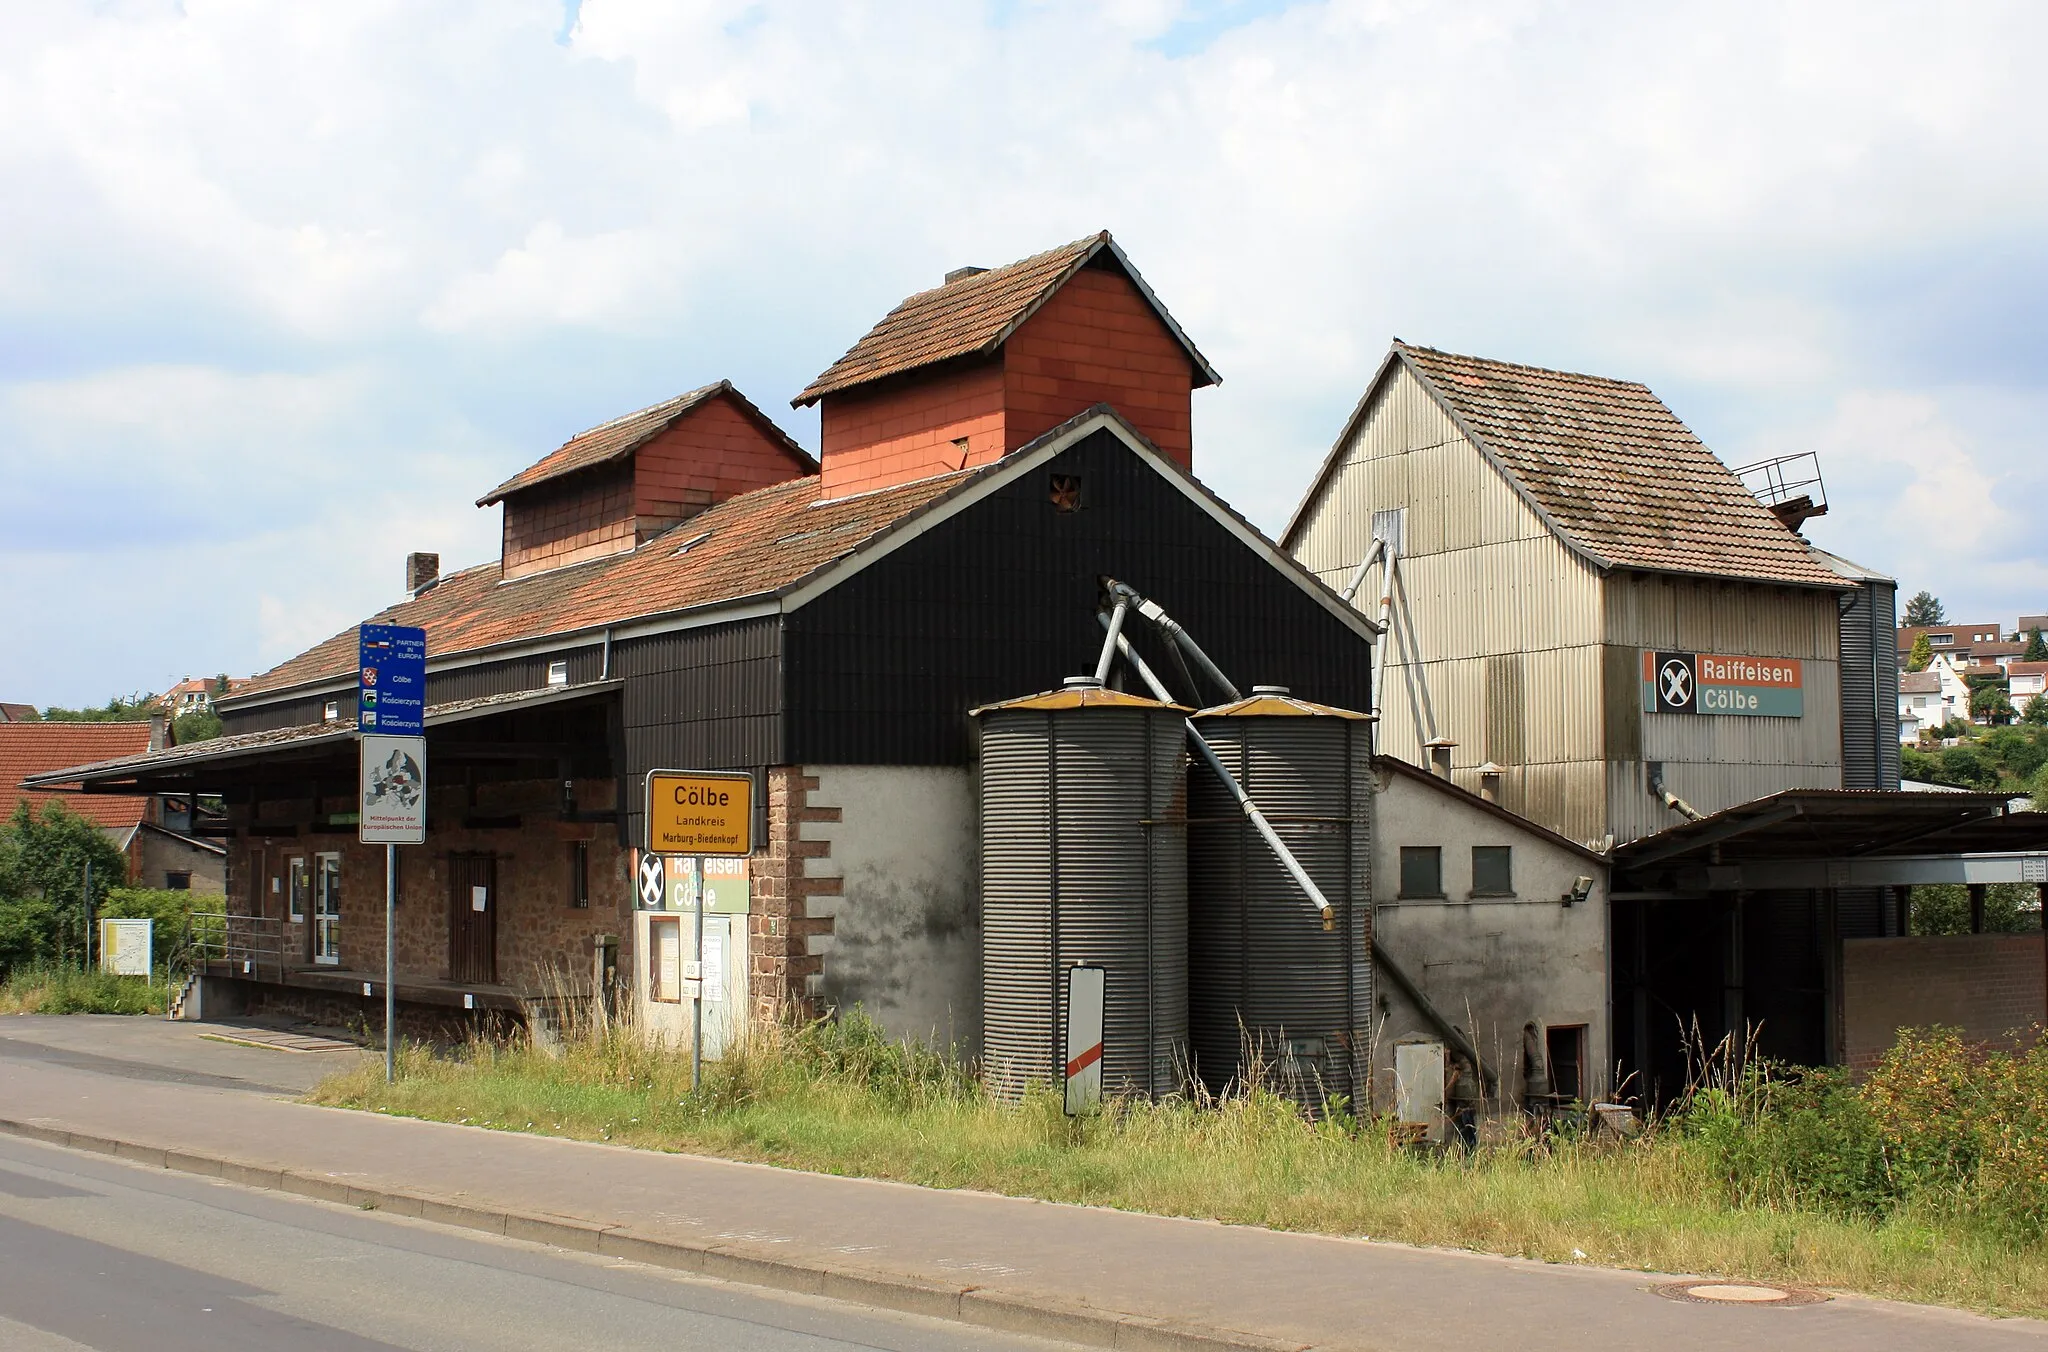 Photo showing: The mill(?) in Cölbe